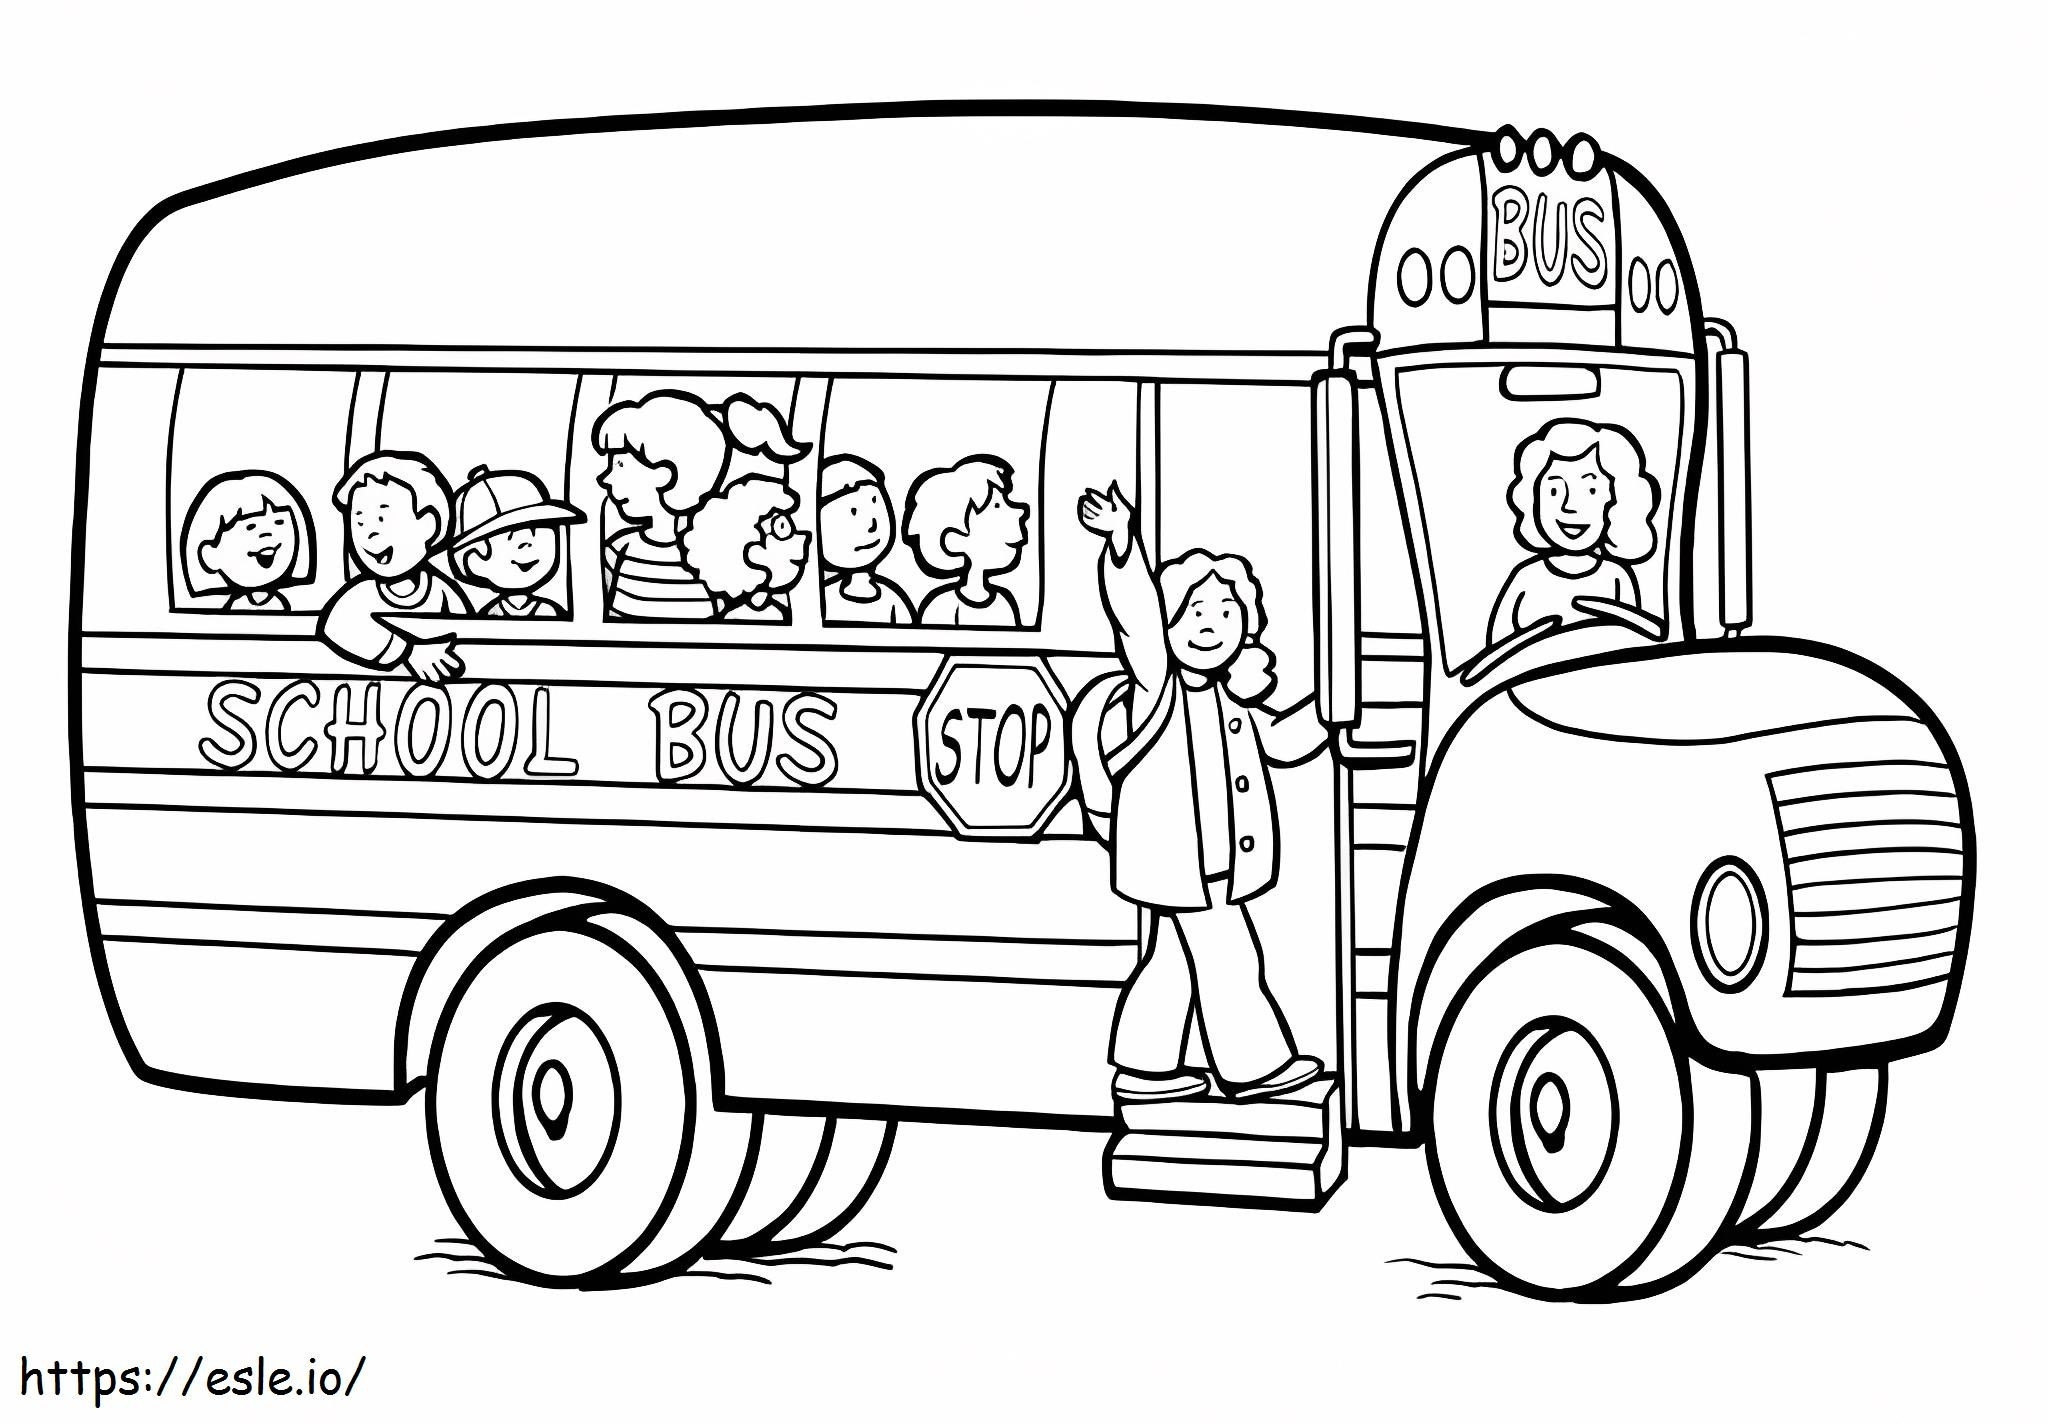 Children On School Bus coloring page